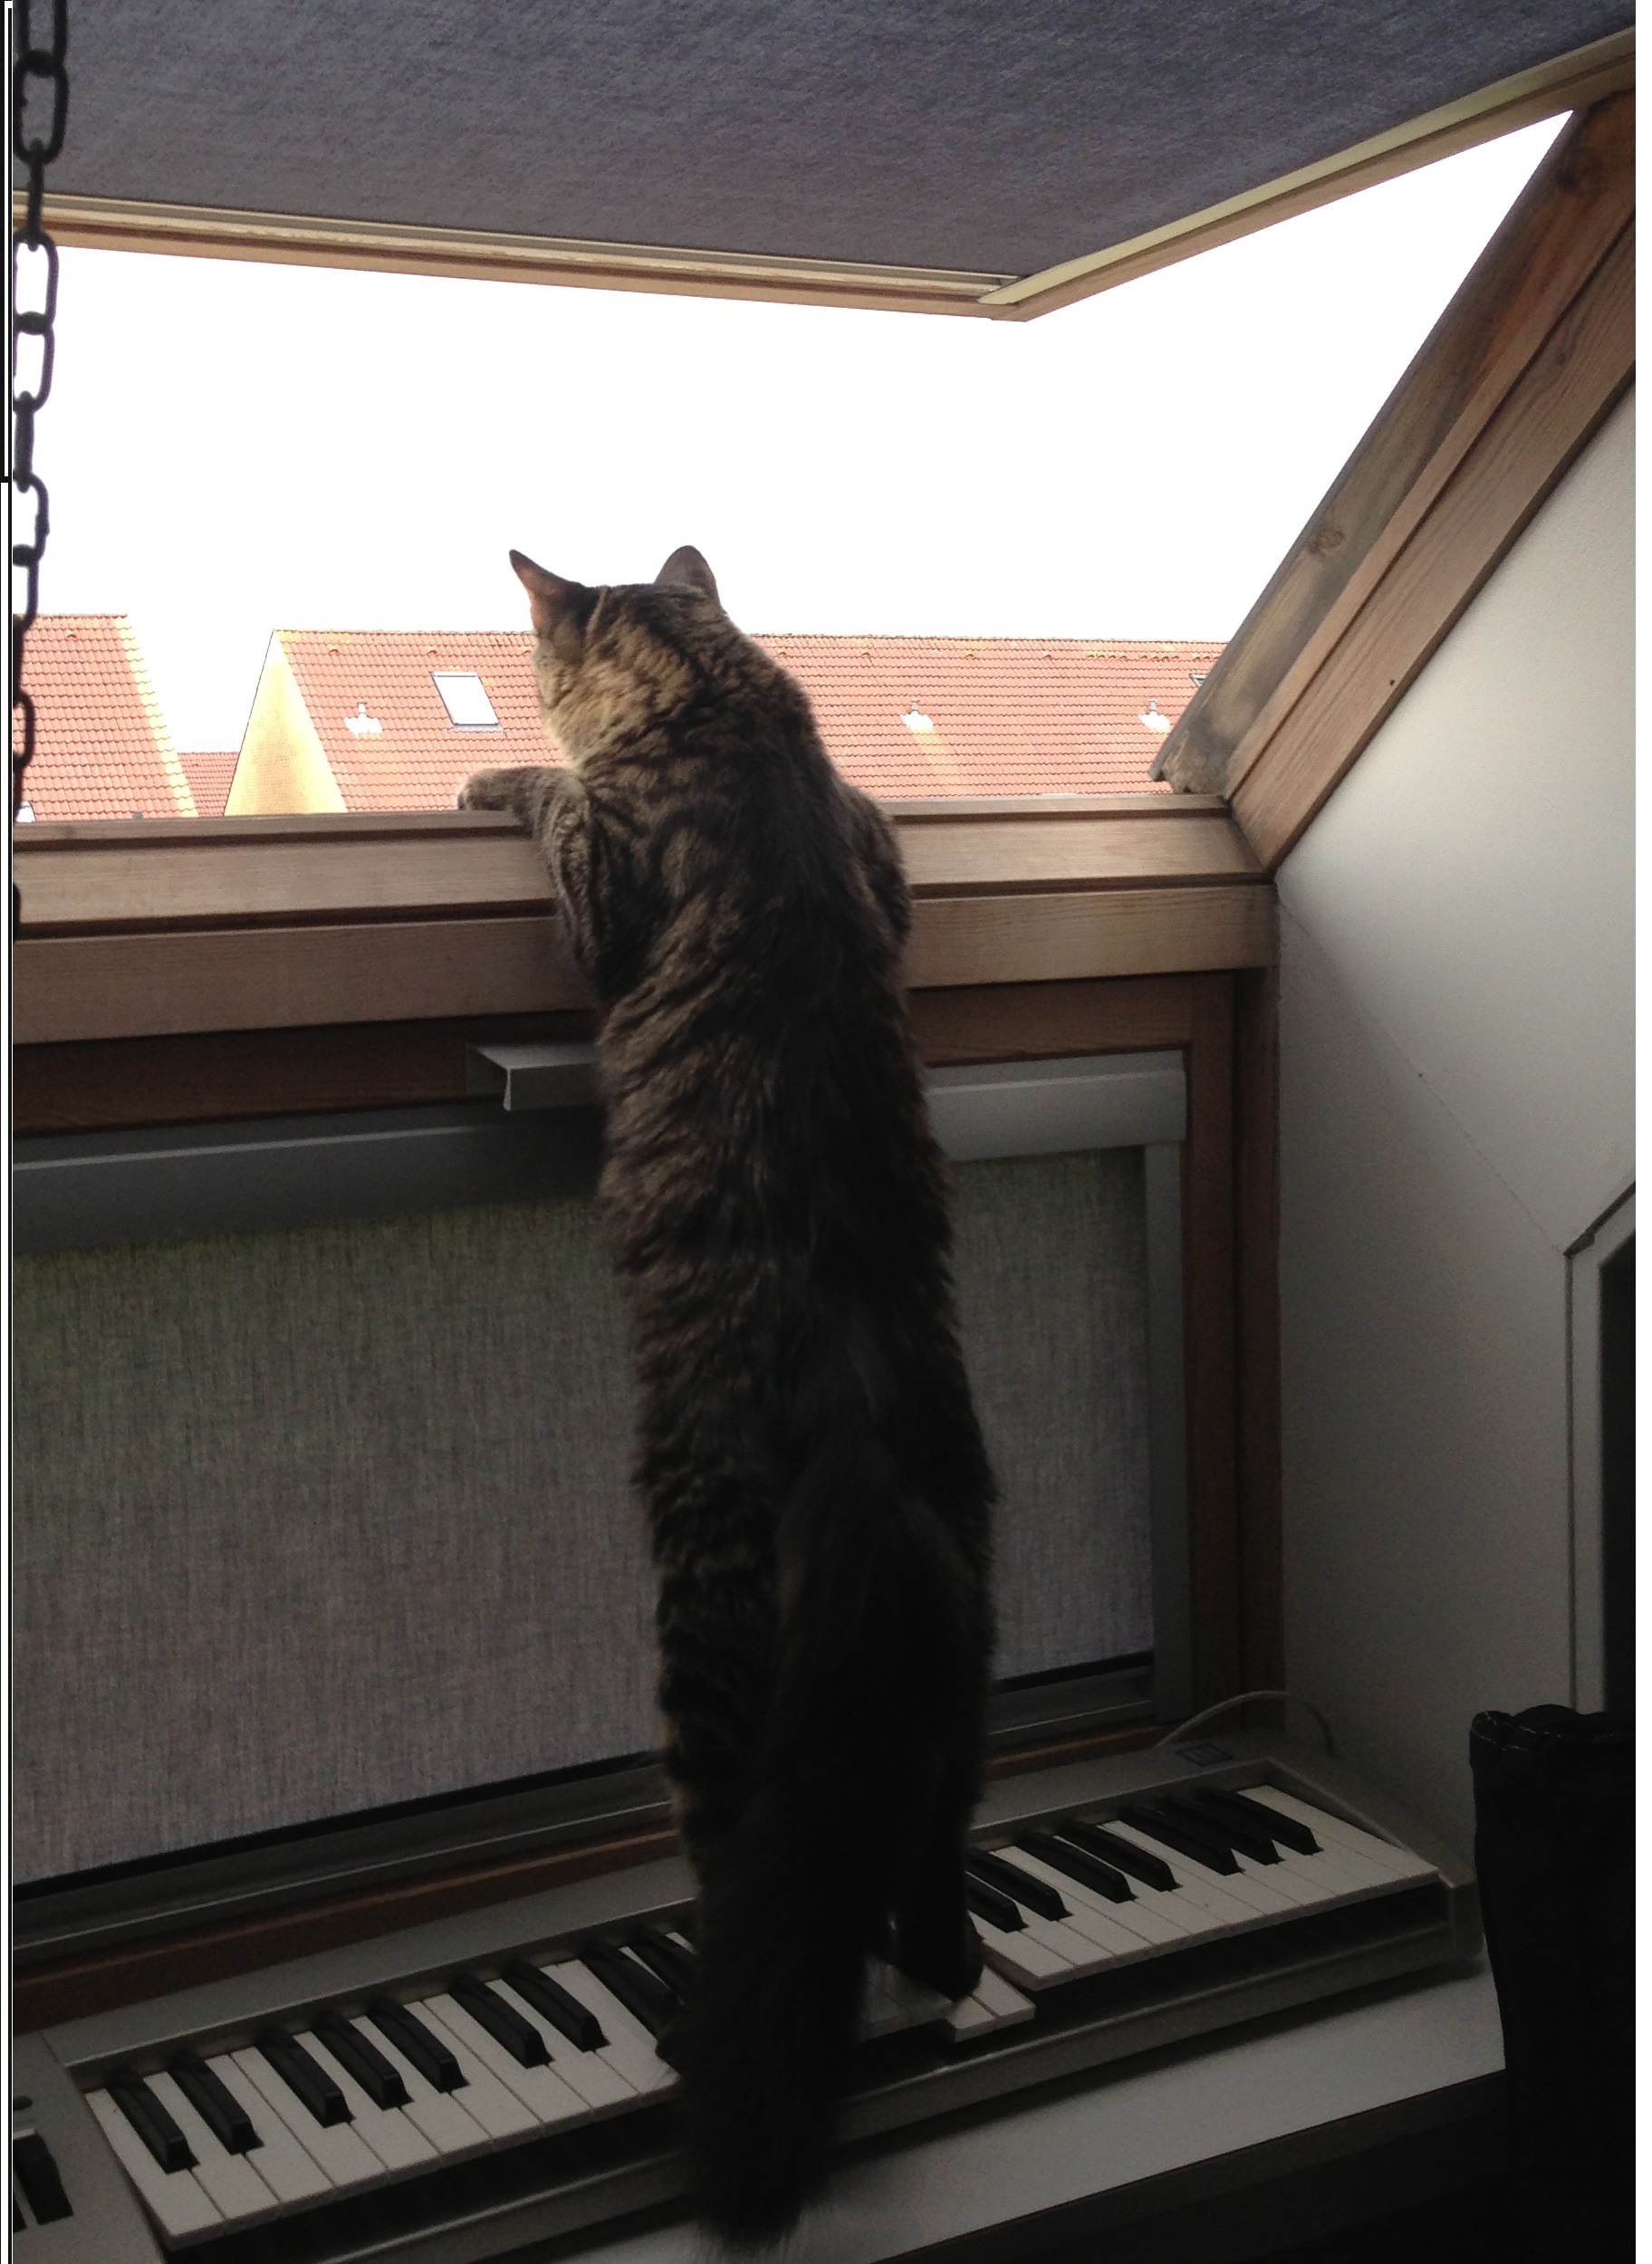 Cat playing keyboard while watching his domain